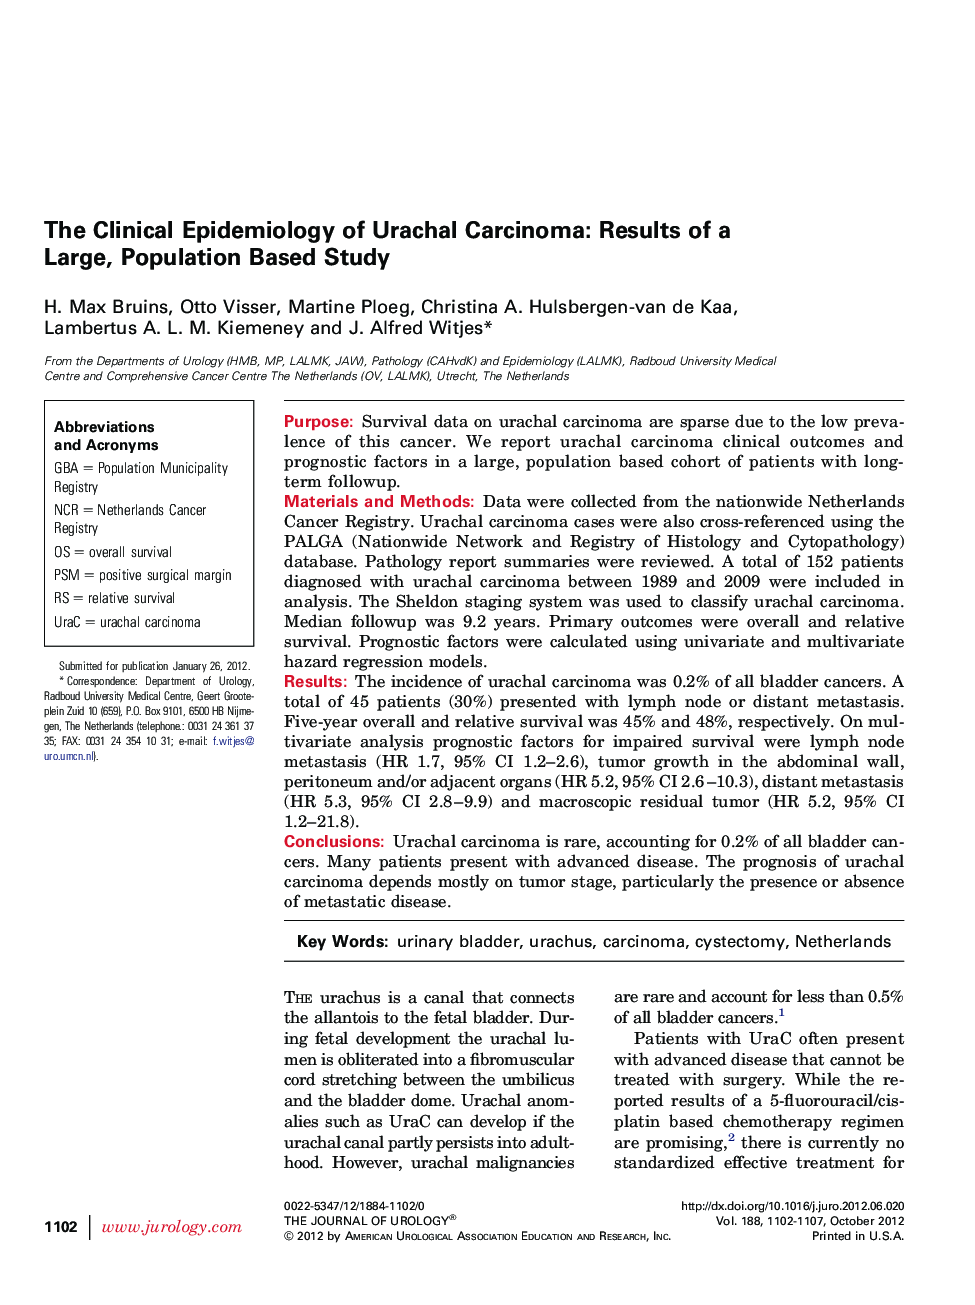 The Clinical Epidemiology of Urachal Carcinoma: Results of a Large, Population Based Study